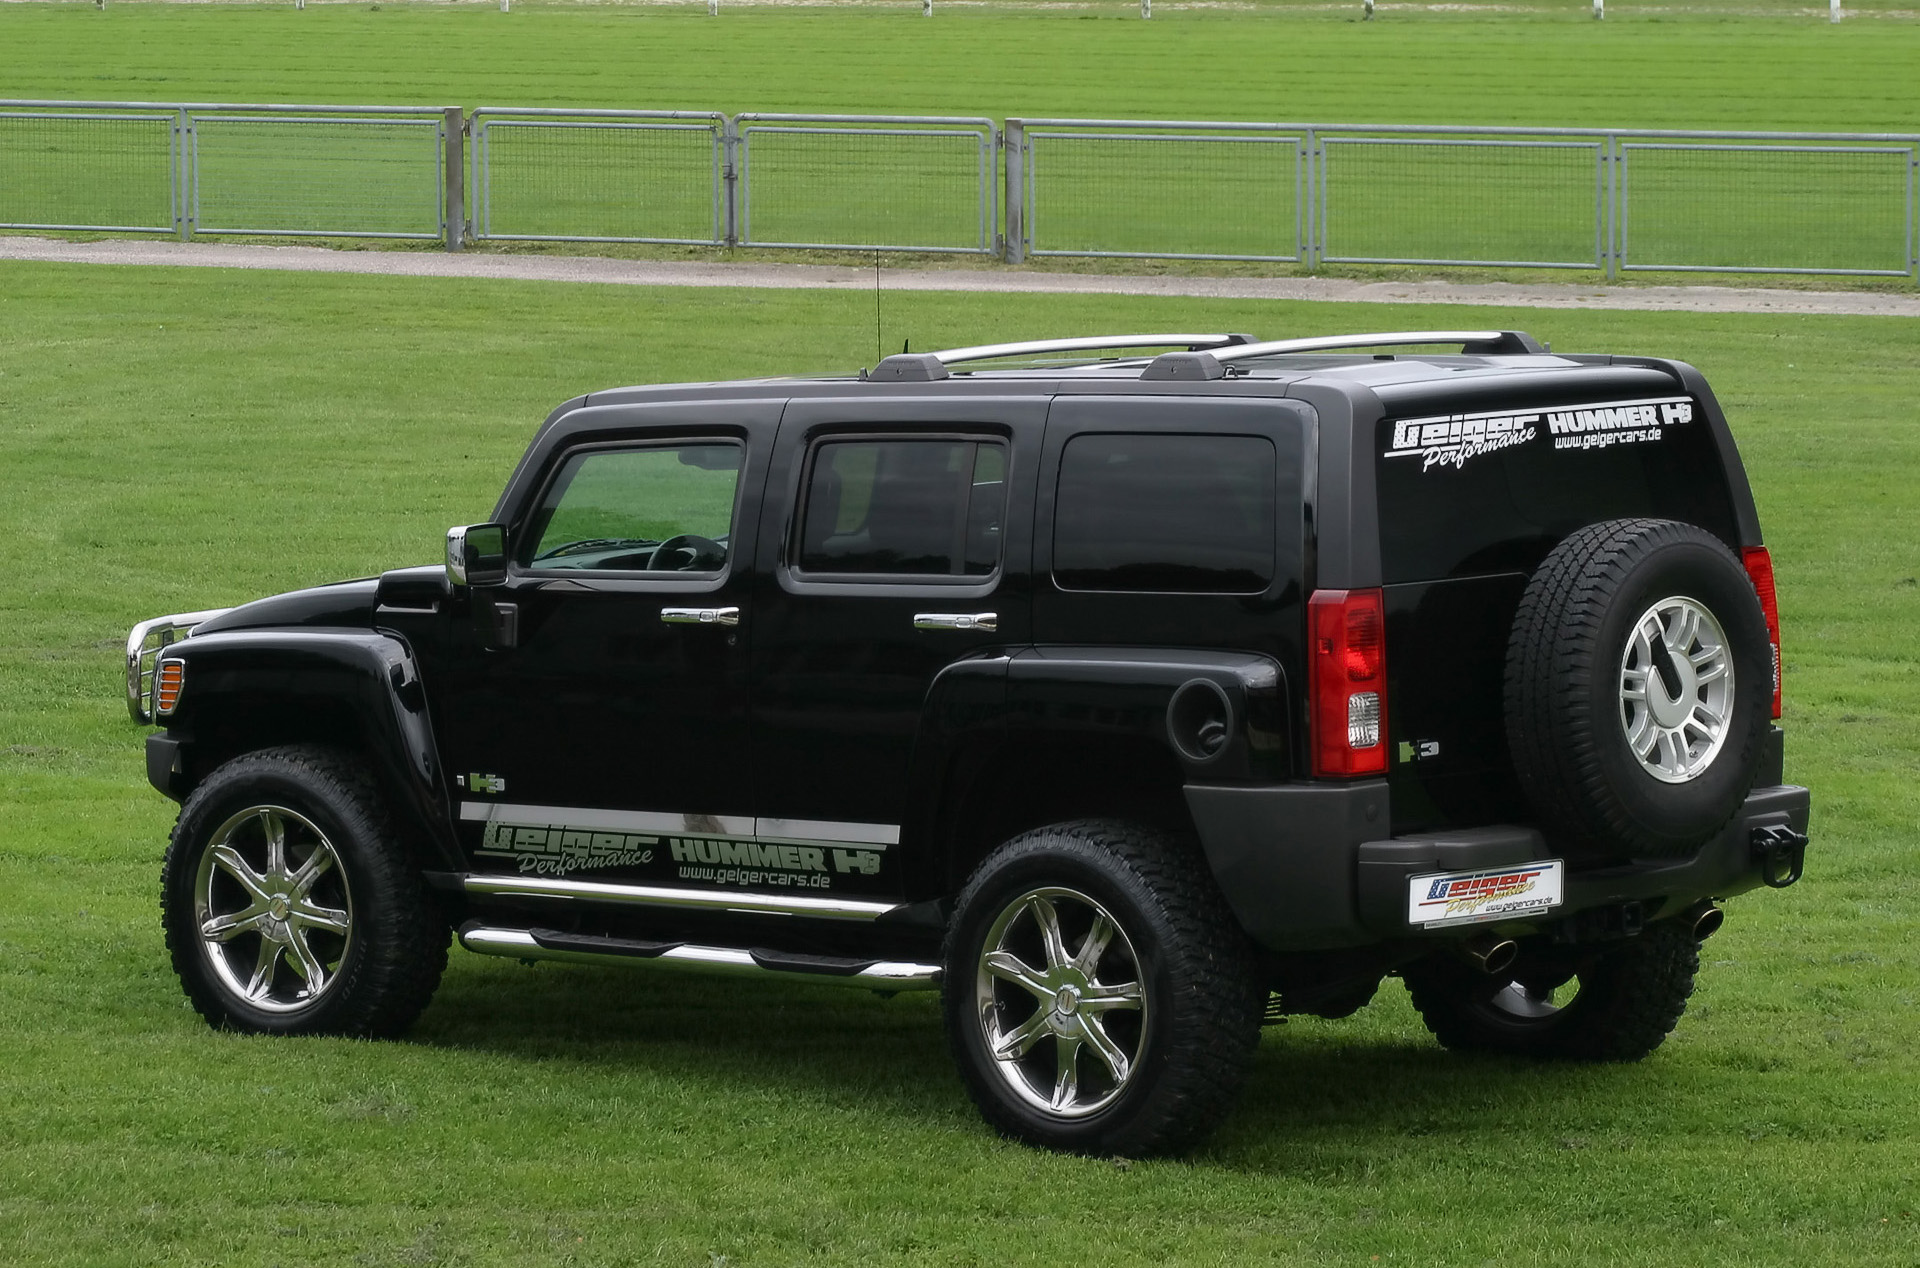 GeigerCars Hummer H3 Tuning photo #2